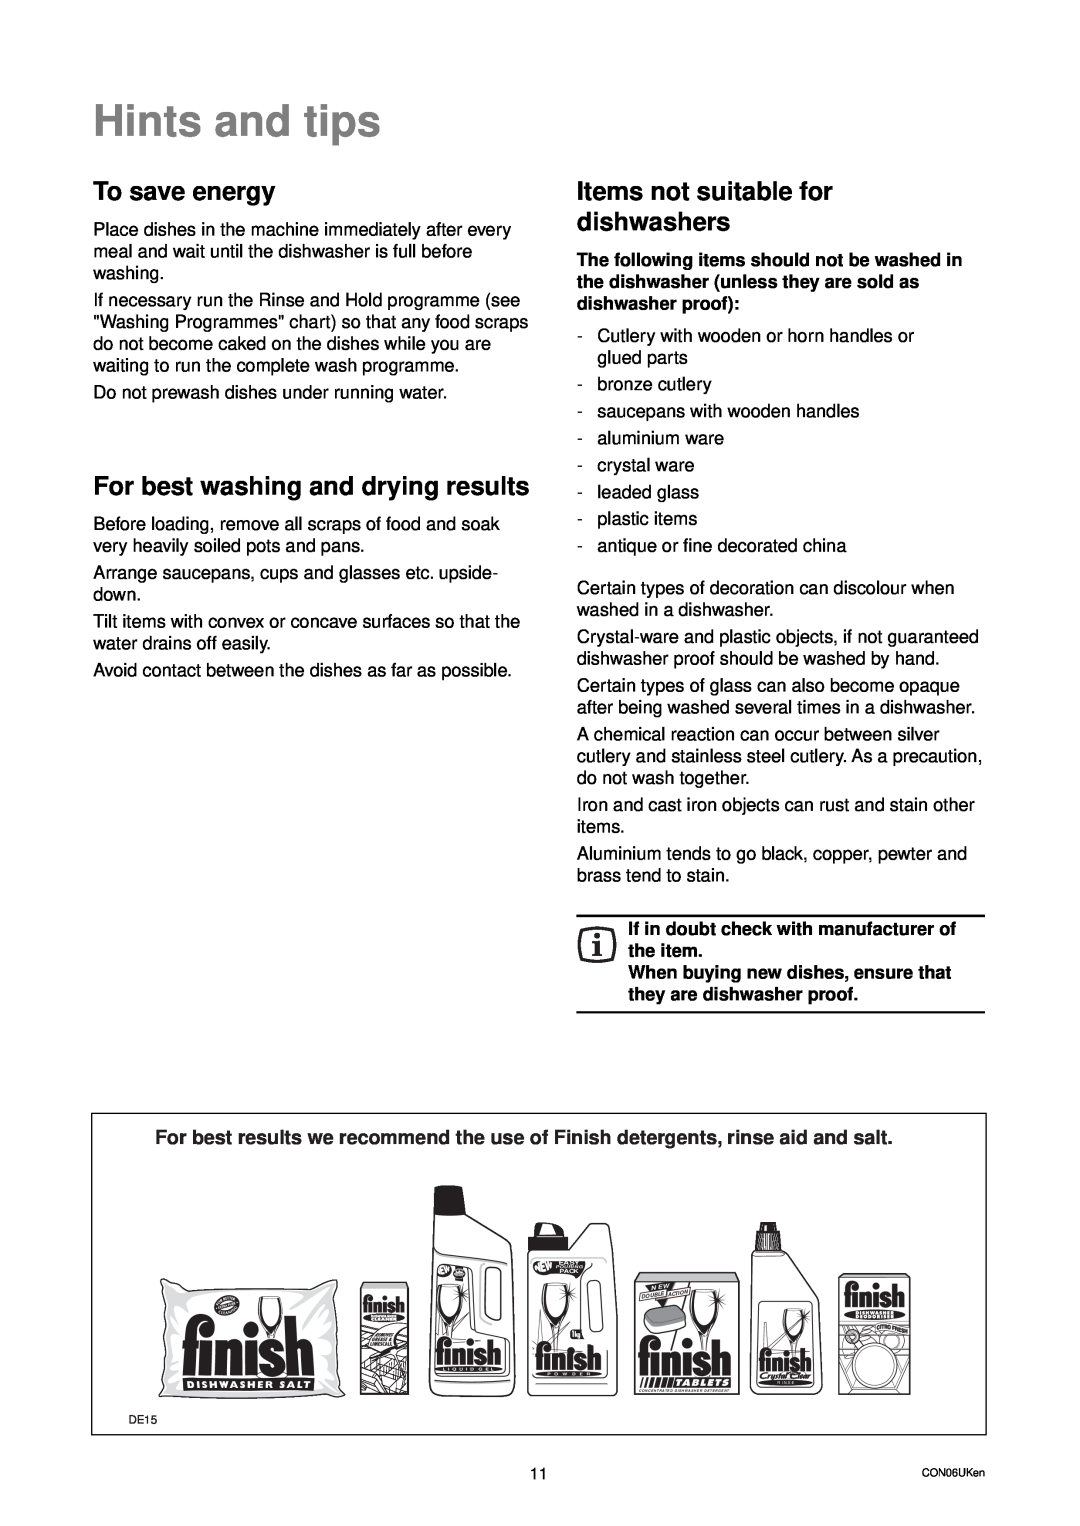 Zanussi ZD 684 Hints and tips, To save energy, For best washing and drying results, Items not suitable for dishwashers 